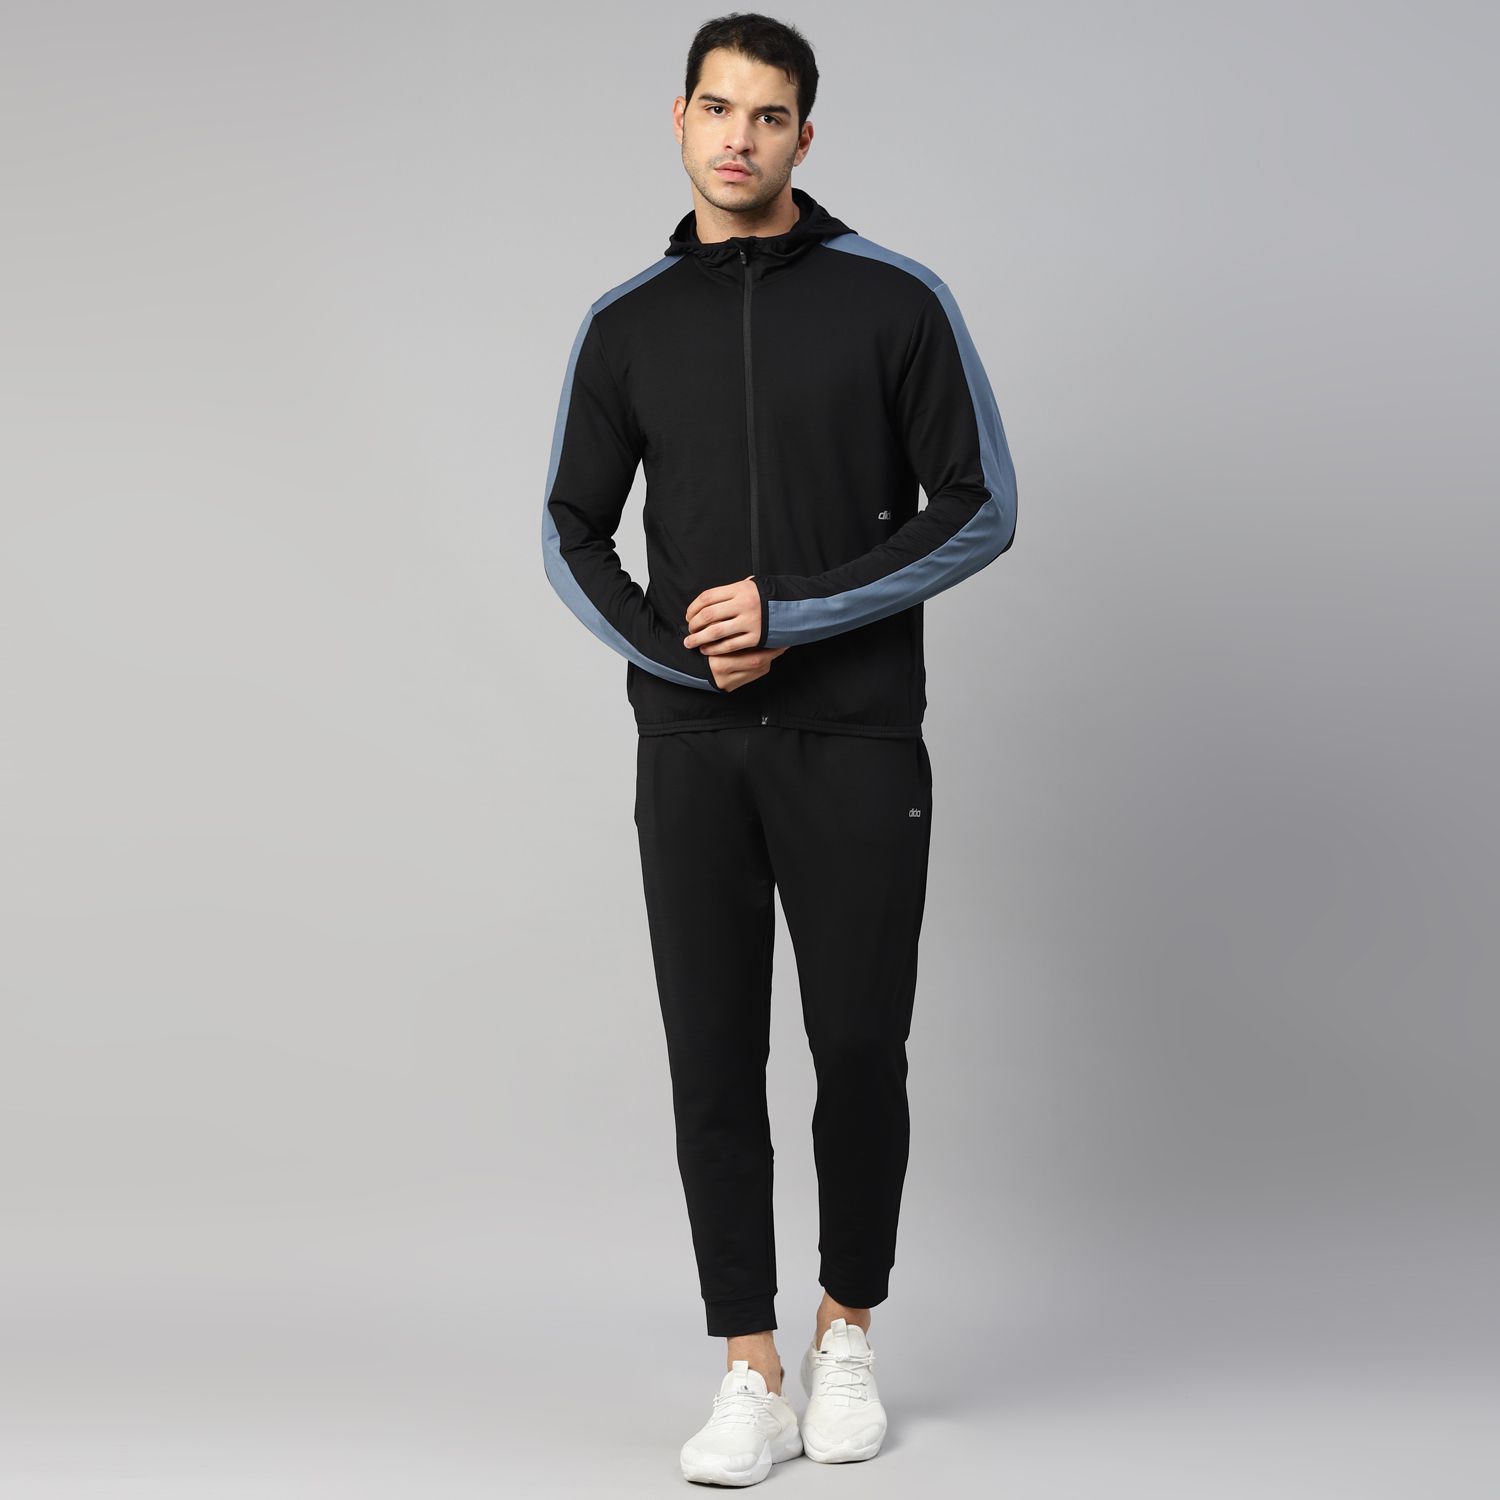     			Dida Sportswear Black Polyester Regular Fit Colorblock Men's Sports Tracksuit ( Pack of 1 )